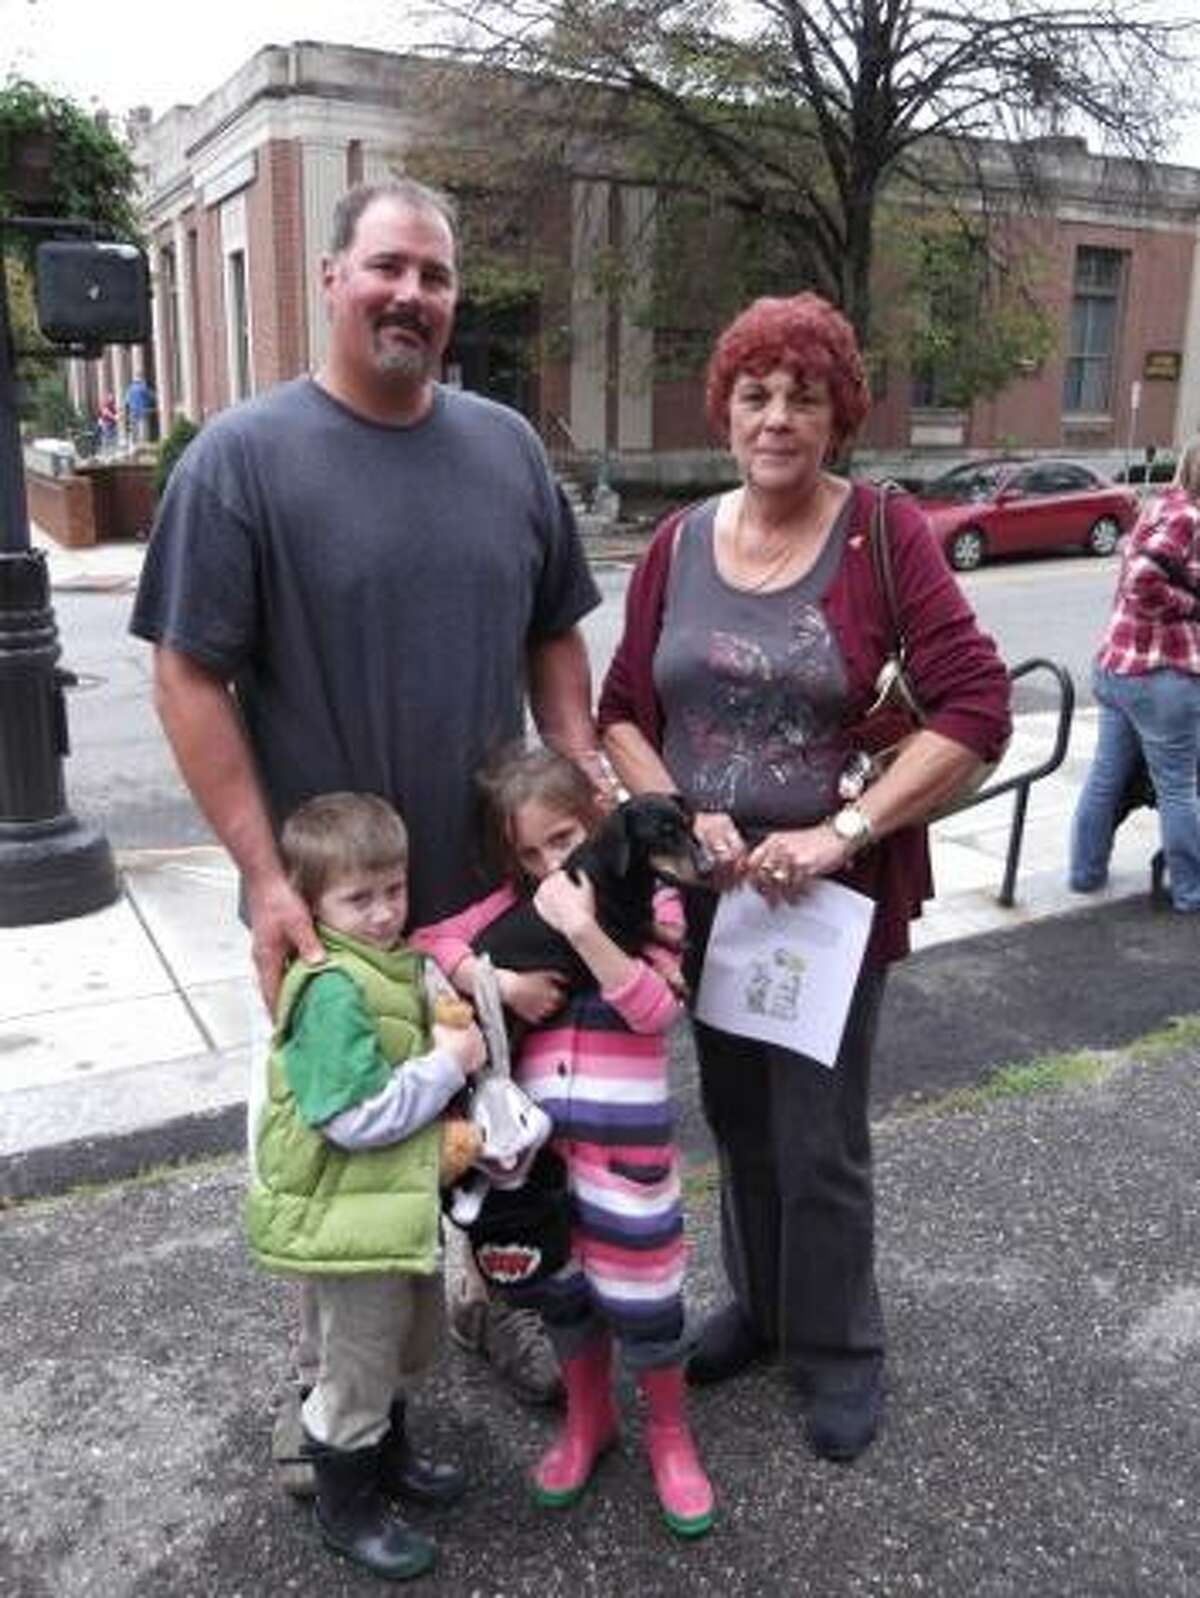 KAITLYN YEAGER/Register Citizen Dog family: Richard Ricupero and his children Isabella and Nicholas wait with Grandma Kenneson and their dog Blackie for the Blessing of the Animals to begin at St. Francis Church. This year's event was the second blessing and first pet parade for the church.